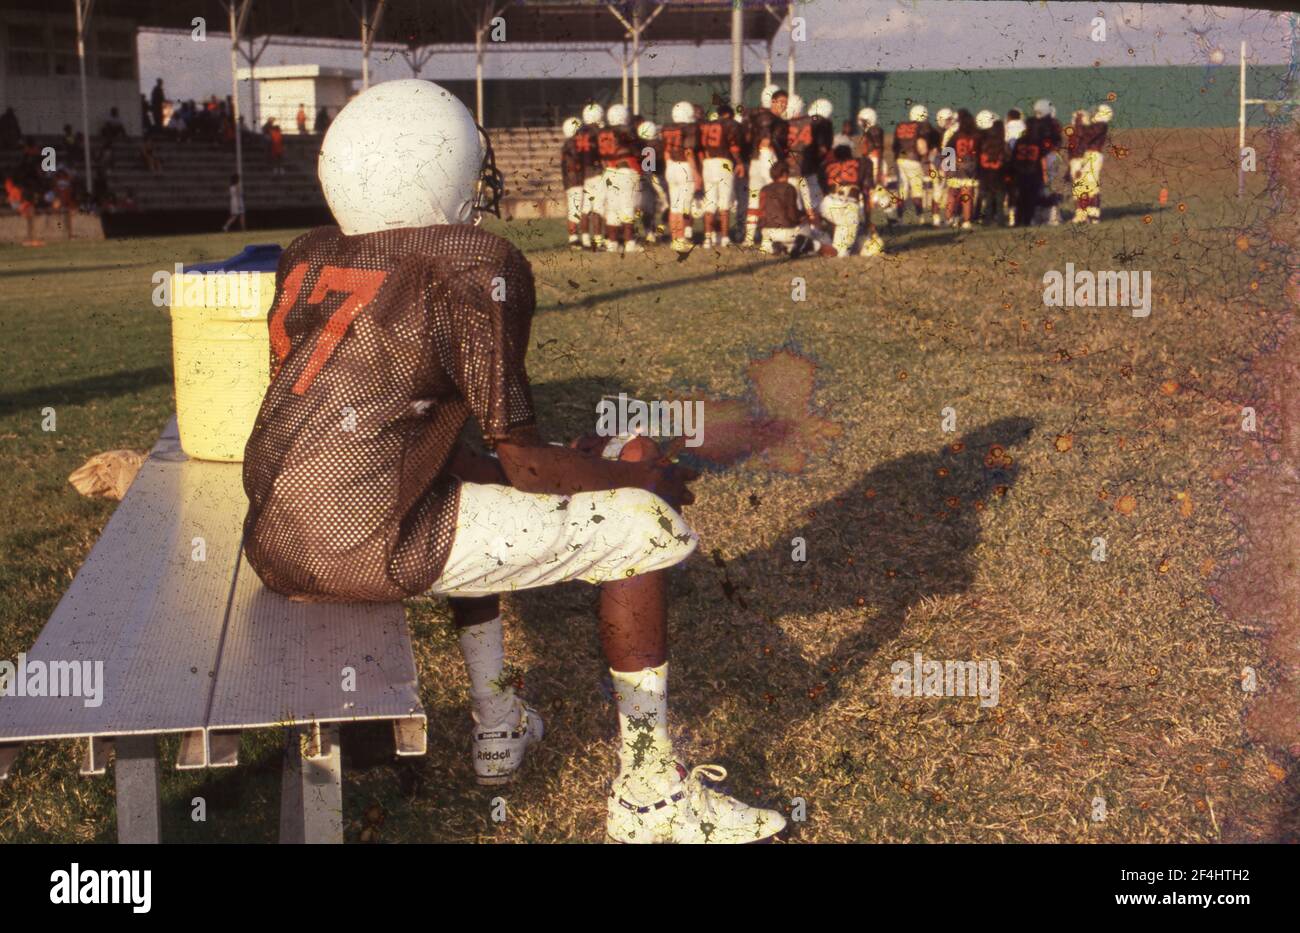 Junior High 'Homecoming' game against Dobie Middle School vs. BUrnet Middle School.  Player sitting alone on the bench. Stock Photo